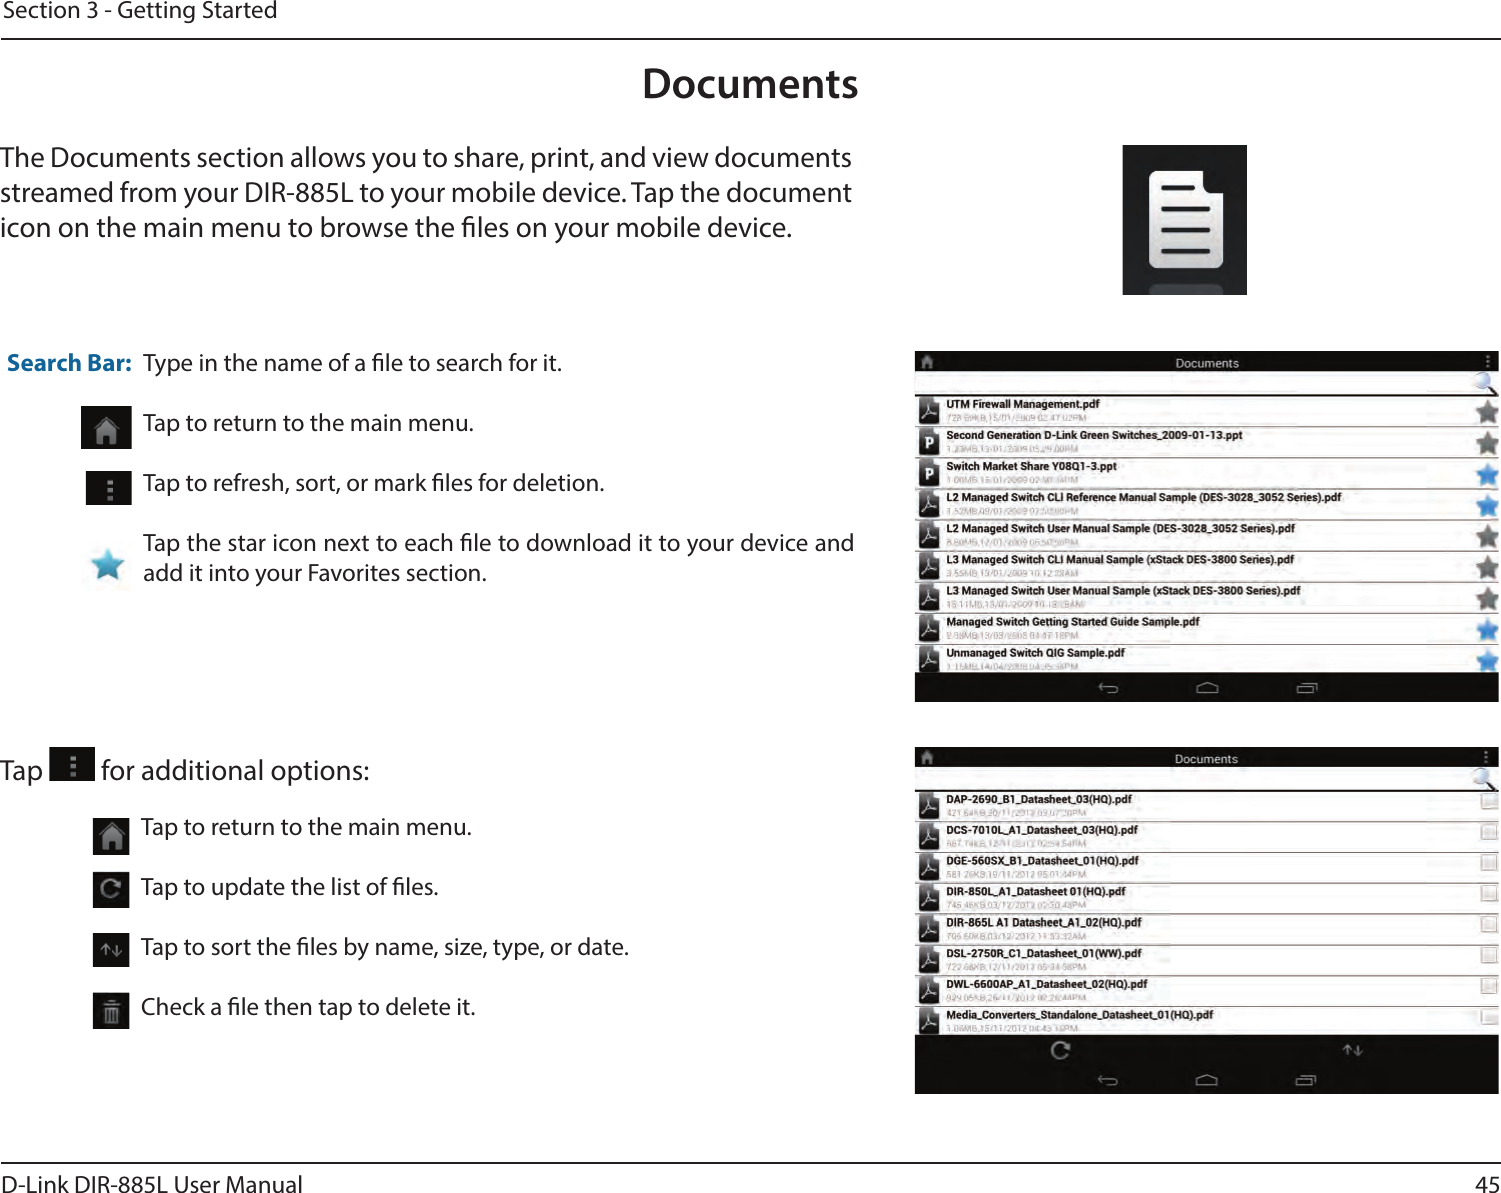 45D-Link DIR-885L User ManualSection 3 - Getting StartedDocumentsThe Documents section allows you to share, print, and view documents streamed from your DIR-885L to your mobile device. Tap the document icon on the main menu to browse the les on your mobile device.Type in the name of a le to search for it.Tap to return to the main menu.Tap to refresh, sort, or mark les for deletion.Tap the star icon next to each le to download it to your device and add it into your Favorites section.Search Bar:Tap   for additional options:Tap to return to the main menu.Tap to update the list of les.Tap to sort the les by name, size, type, or date.Check a le then tap to delete it.